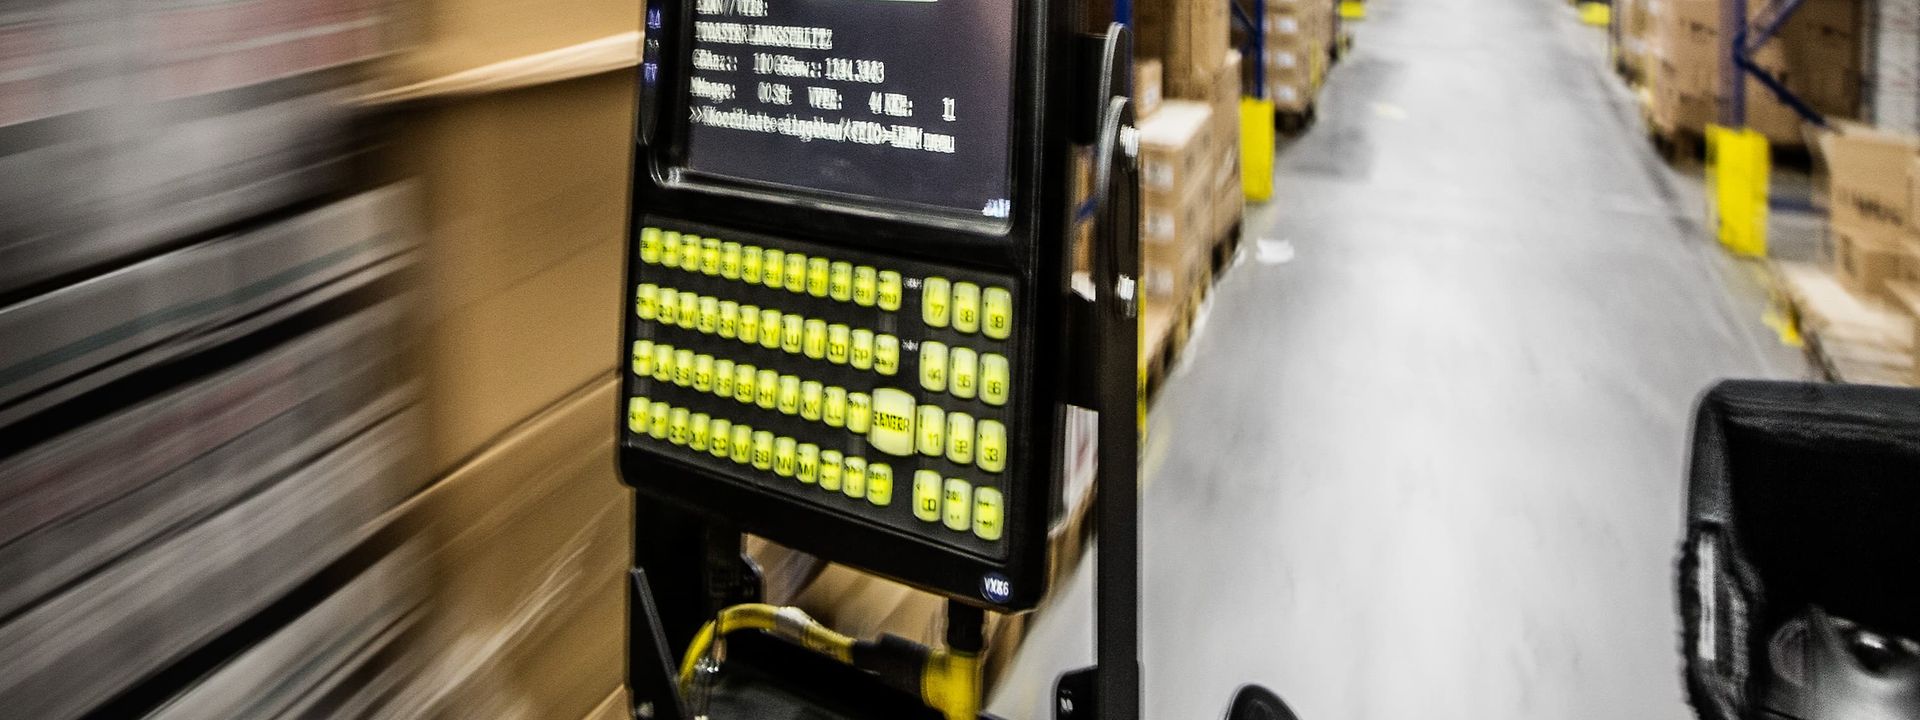 Forklift truck drives between shelf lines in a warehouse